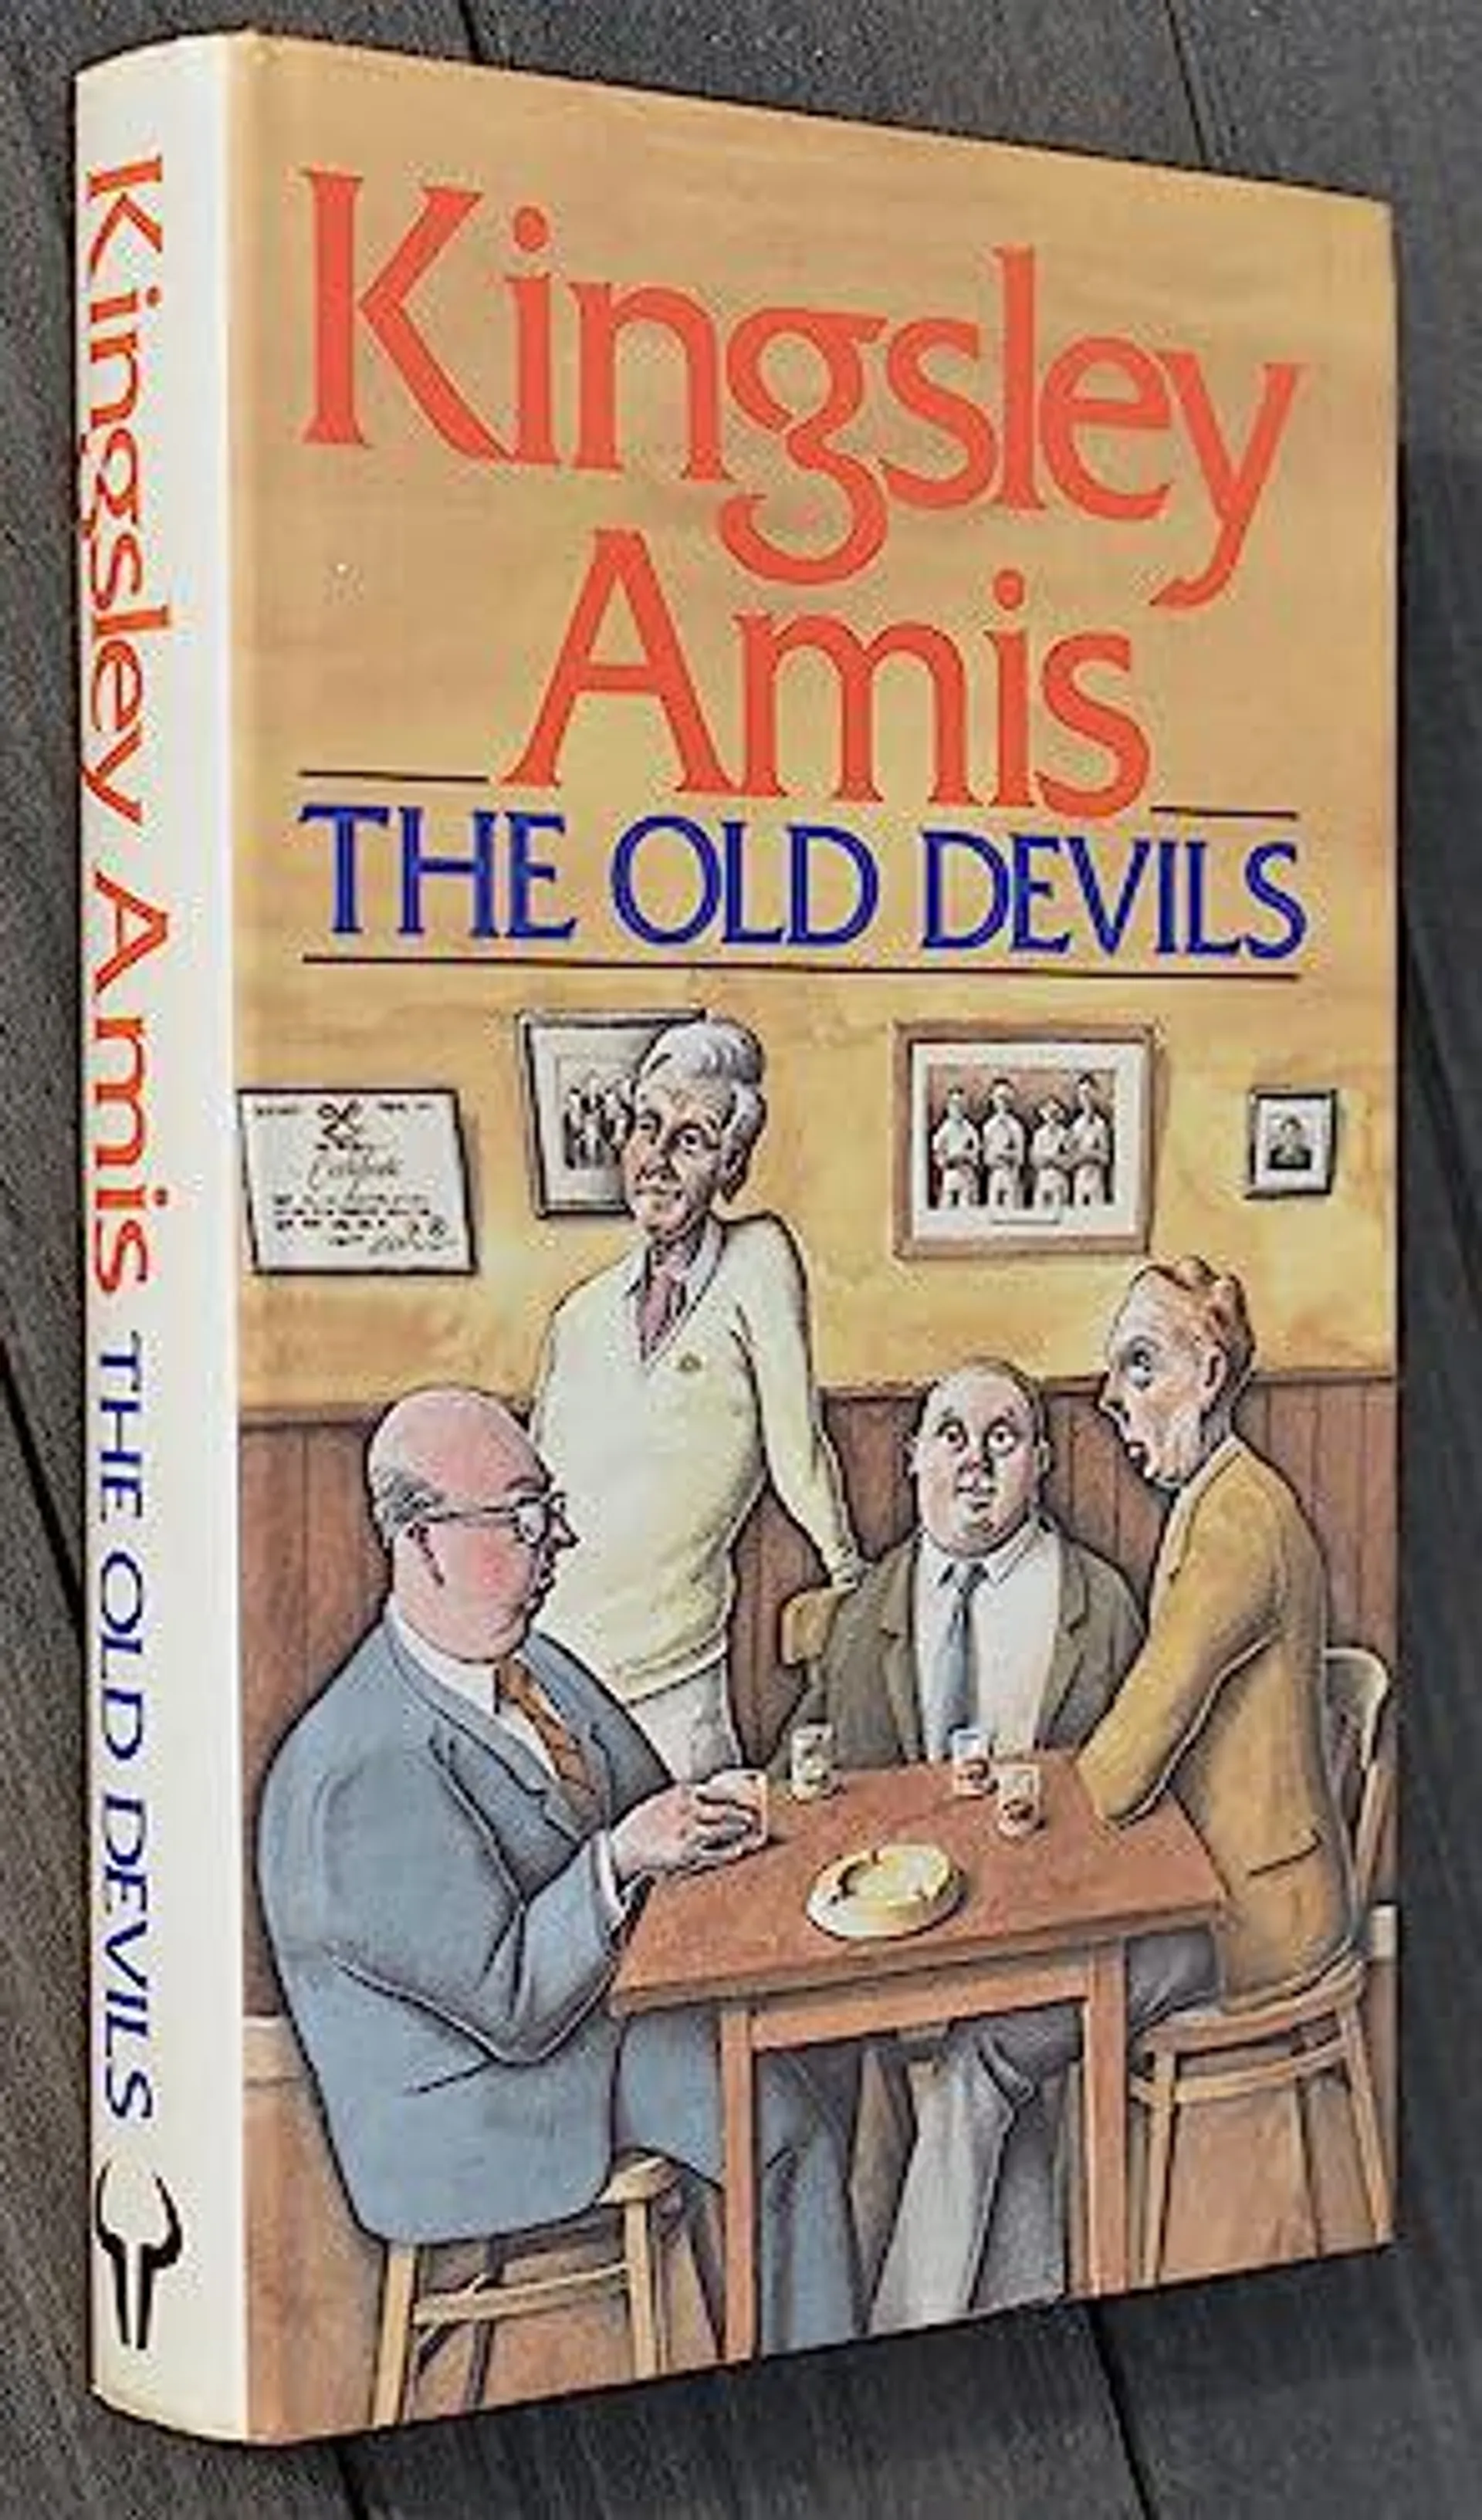 The Old Devils by Kingsley Amis